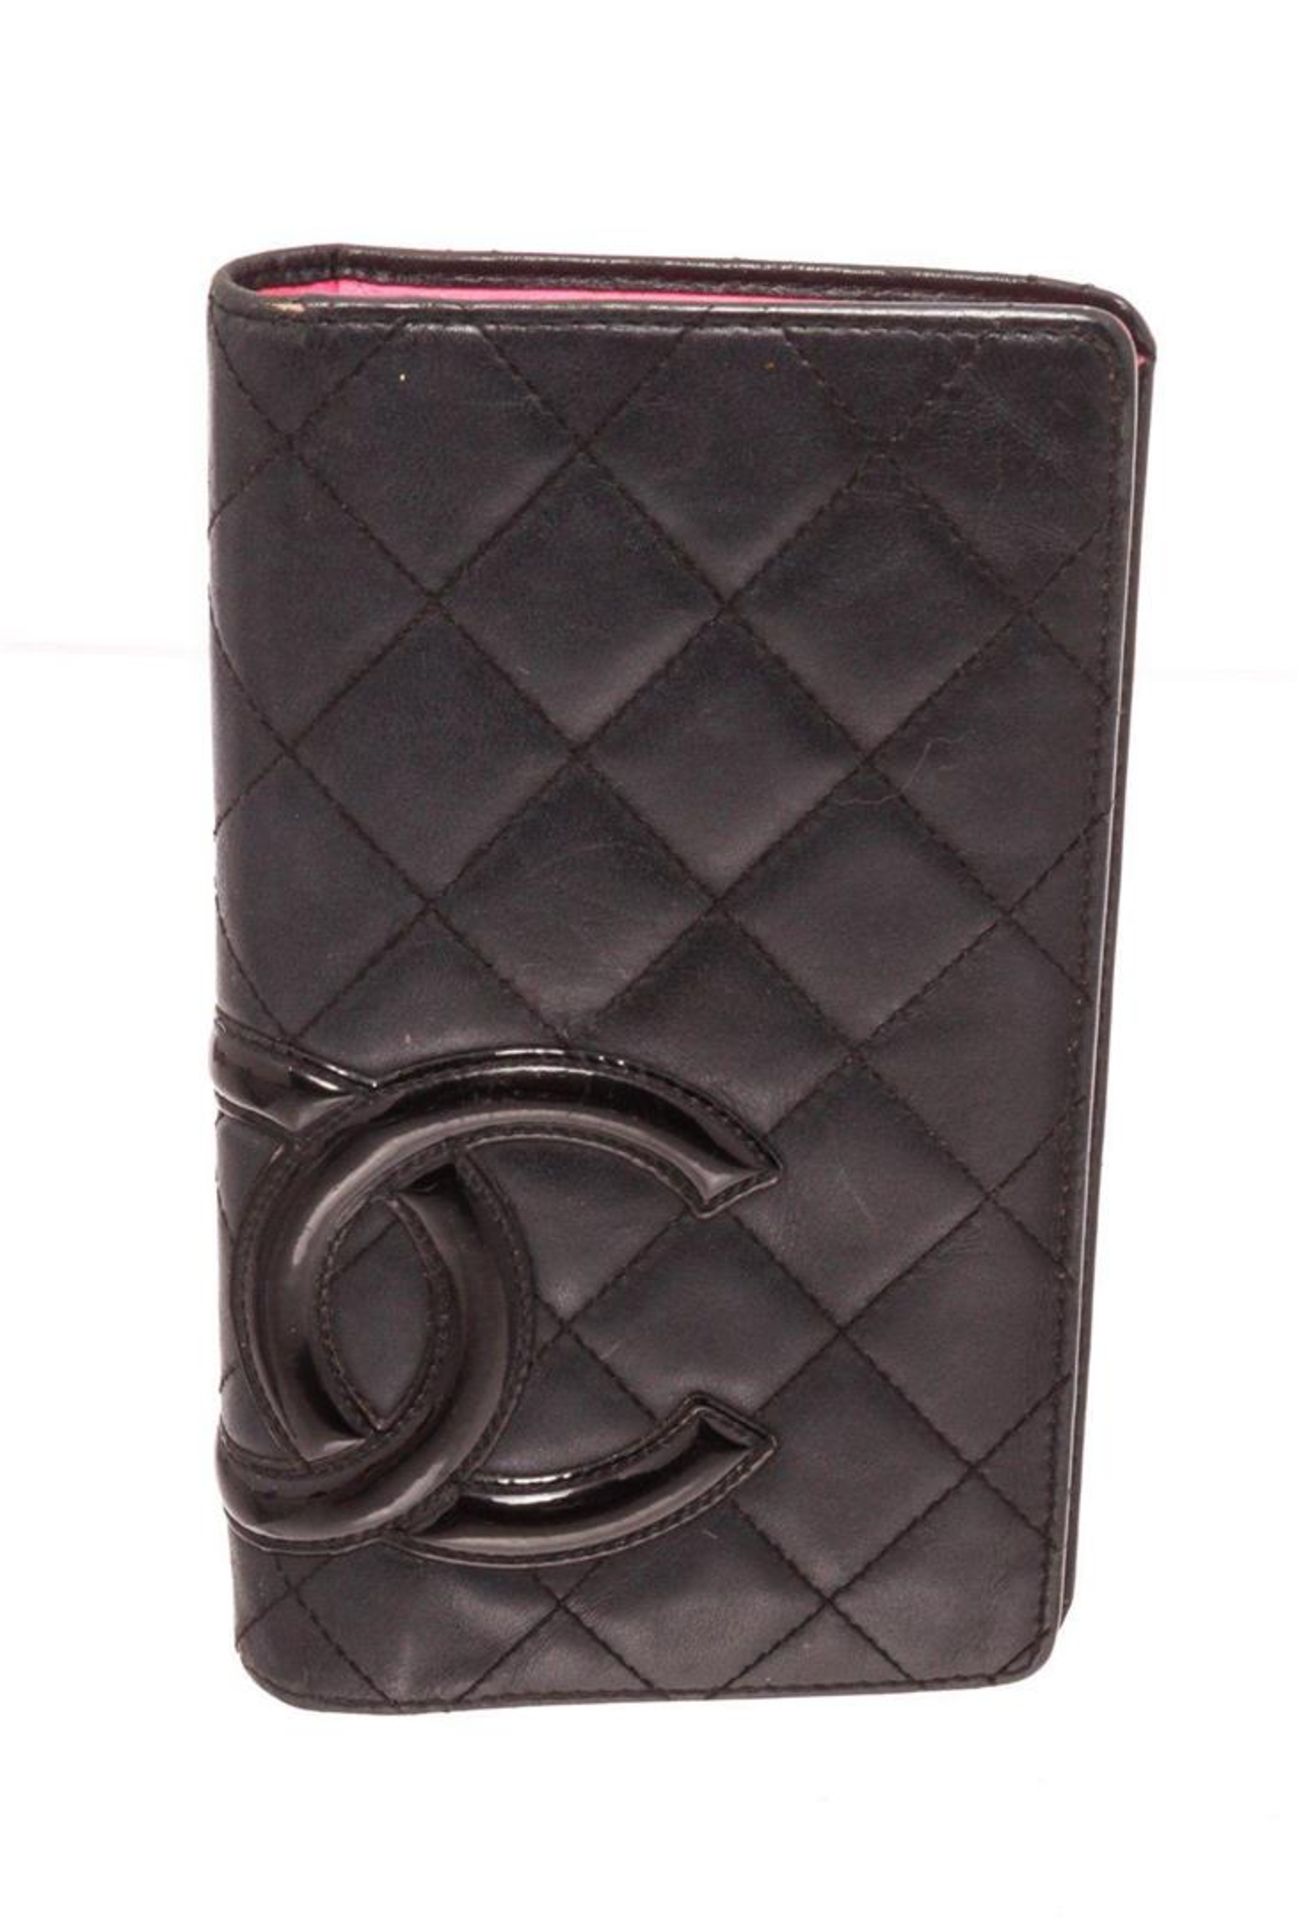 Chanel Black Leather Long Card Wallet